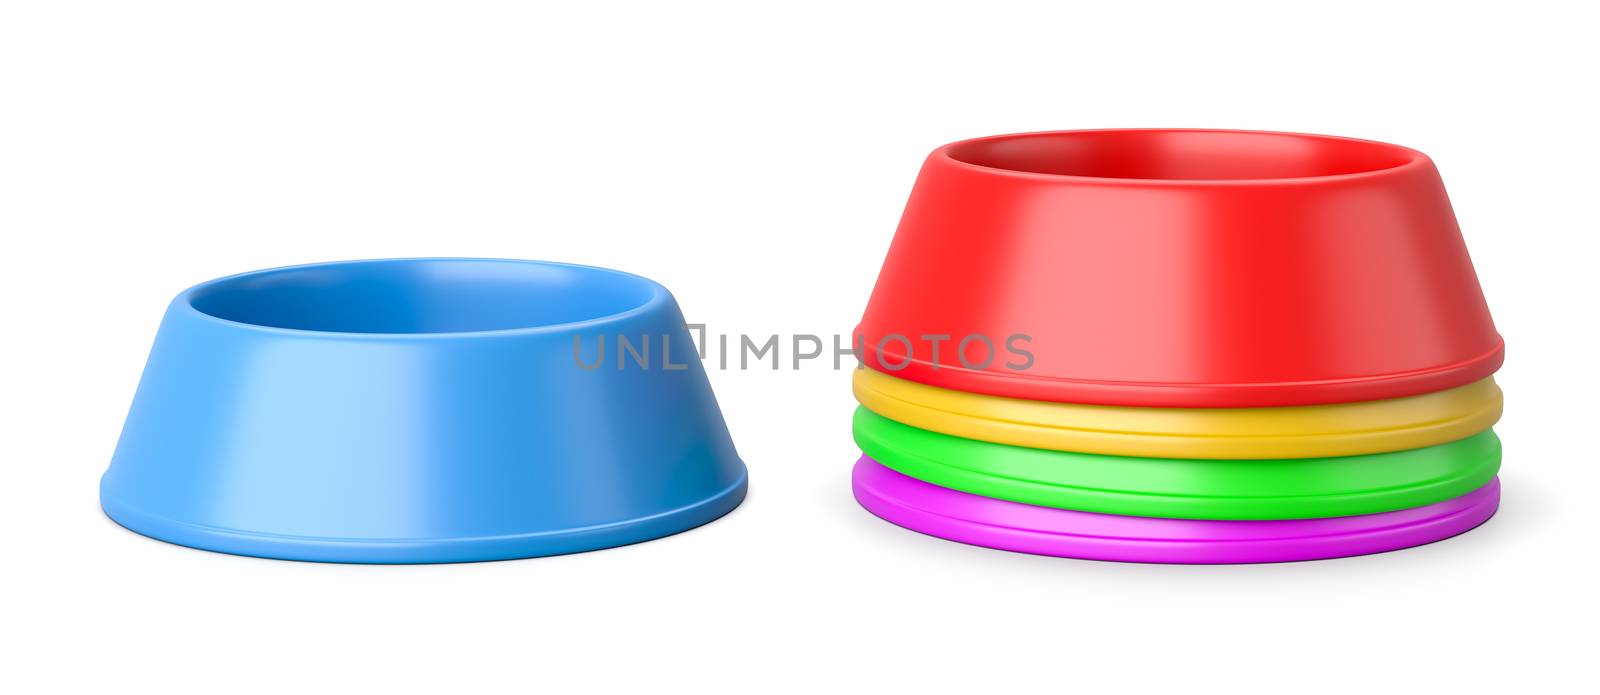 Stack of Colorful Plastic Pets Bowls Isolated on White Background 3D Illustration